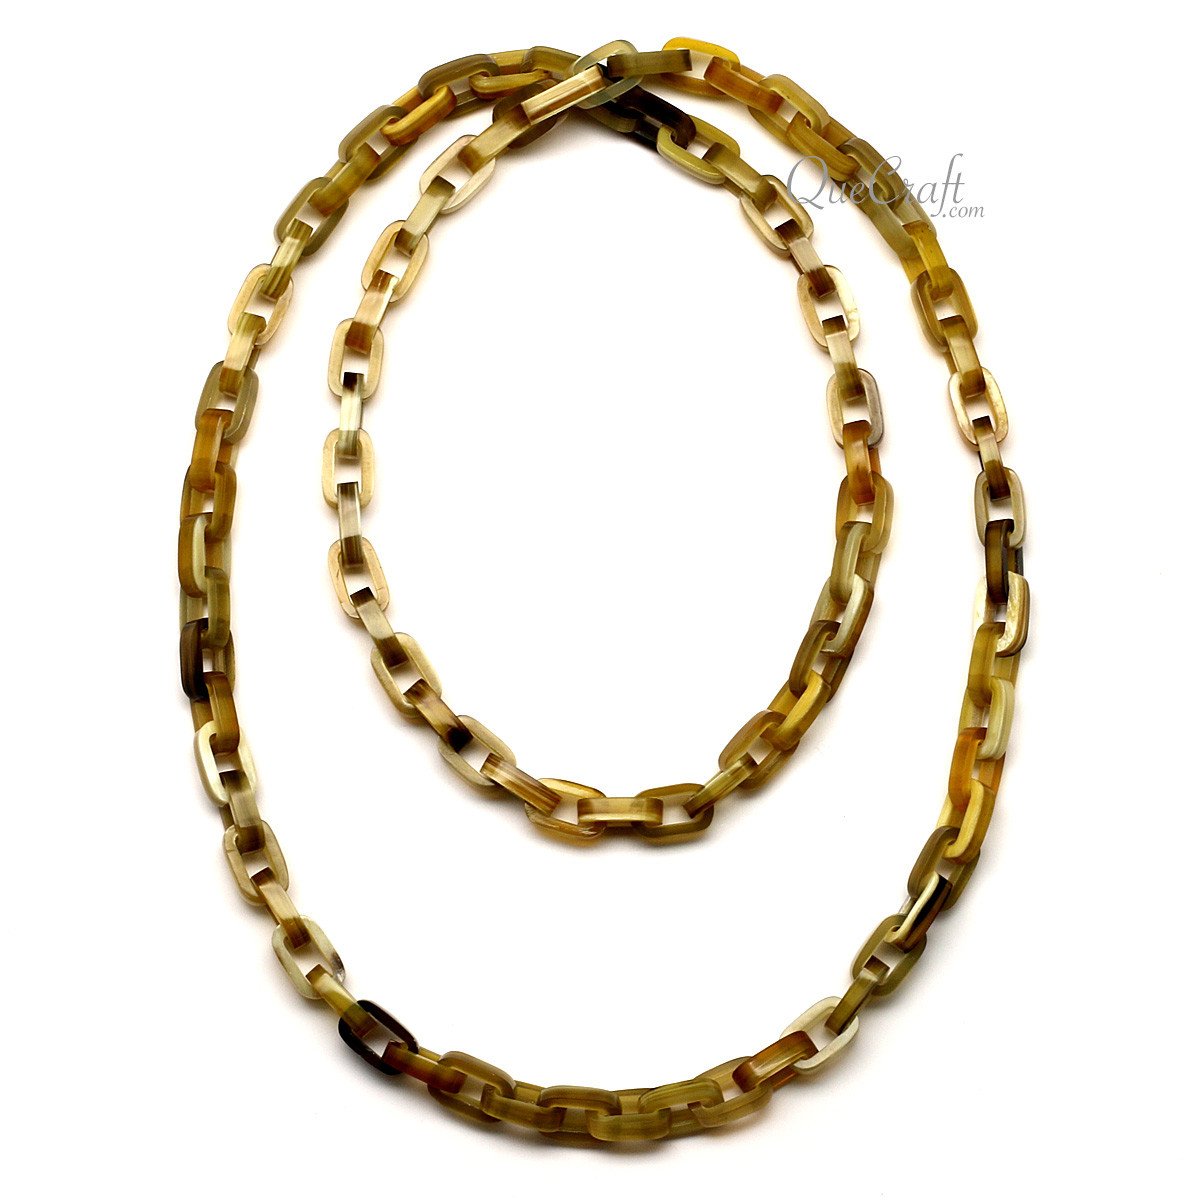 Horn Chain Necklace #12443 - HORN JEWELRY